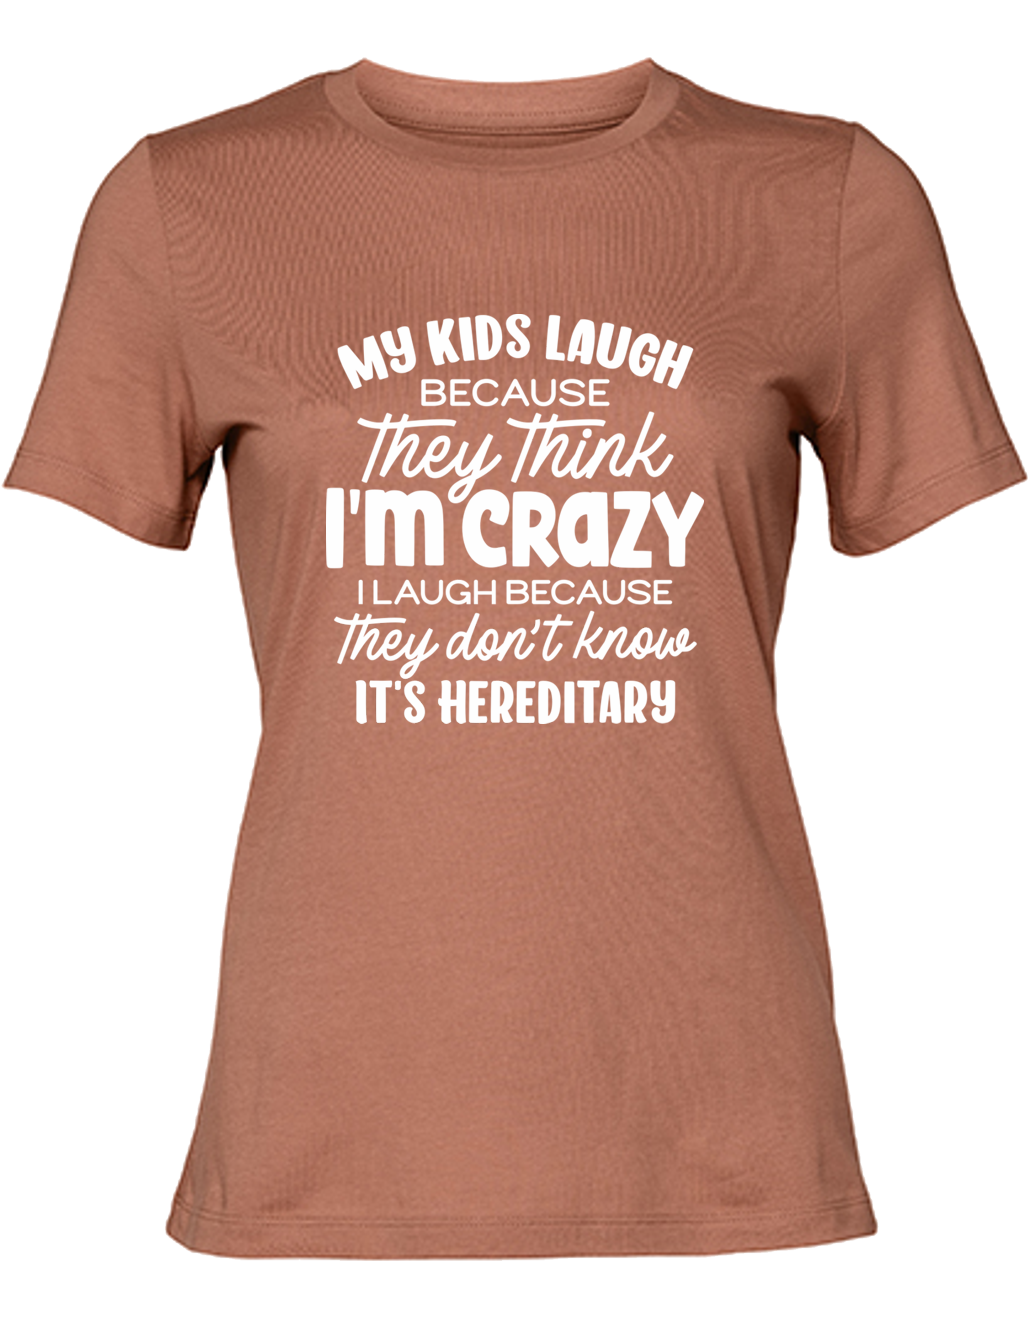 My kids laugh becouse